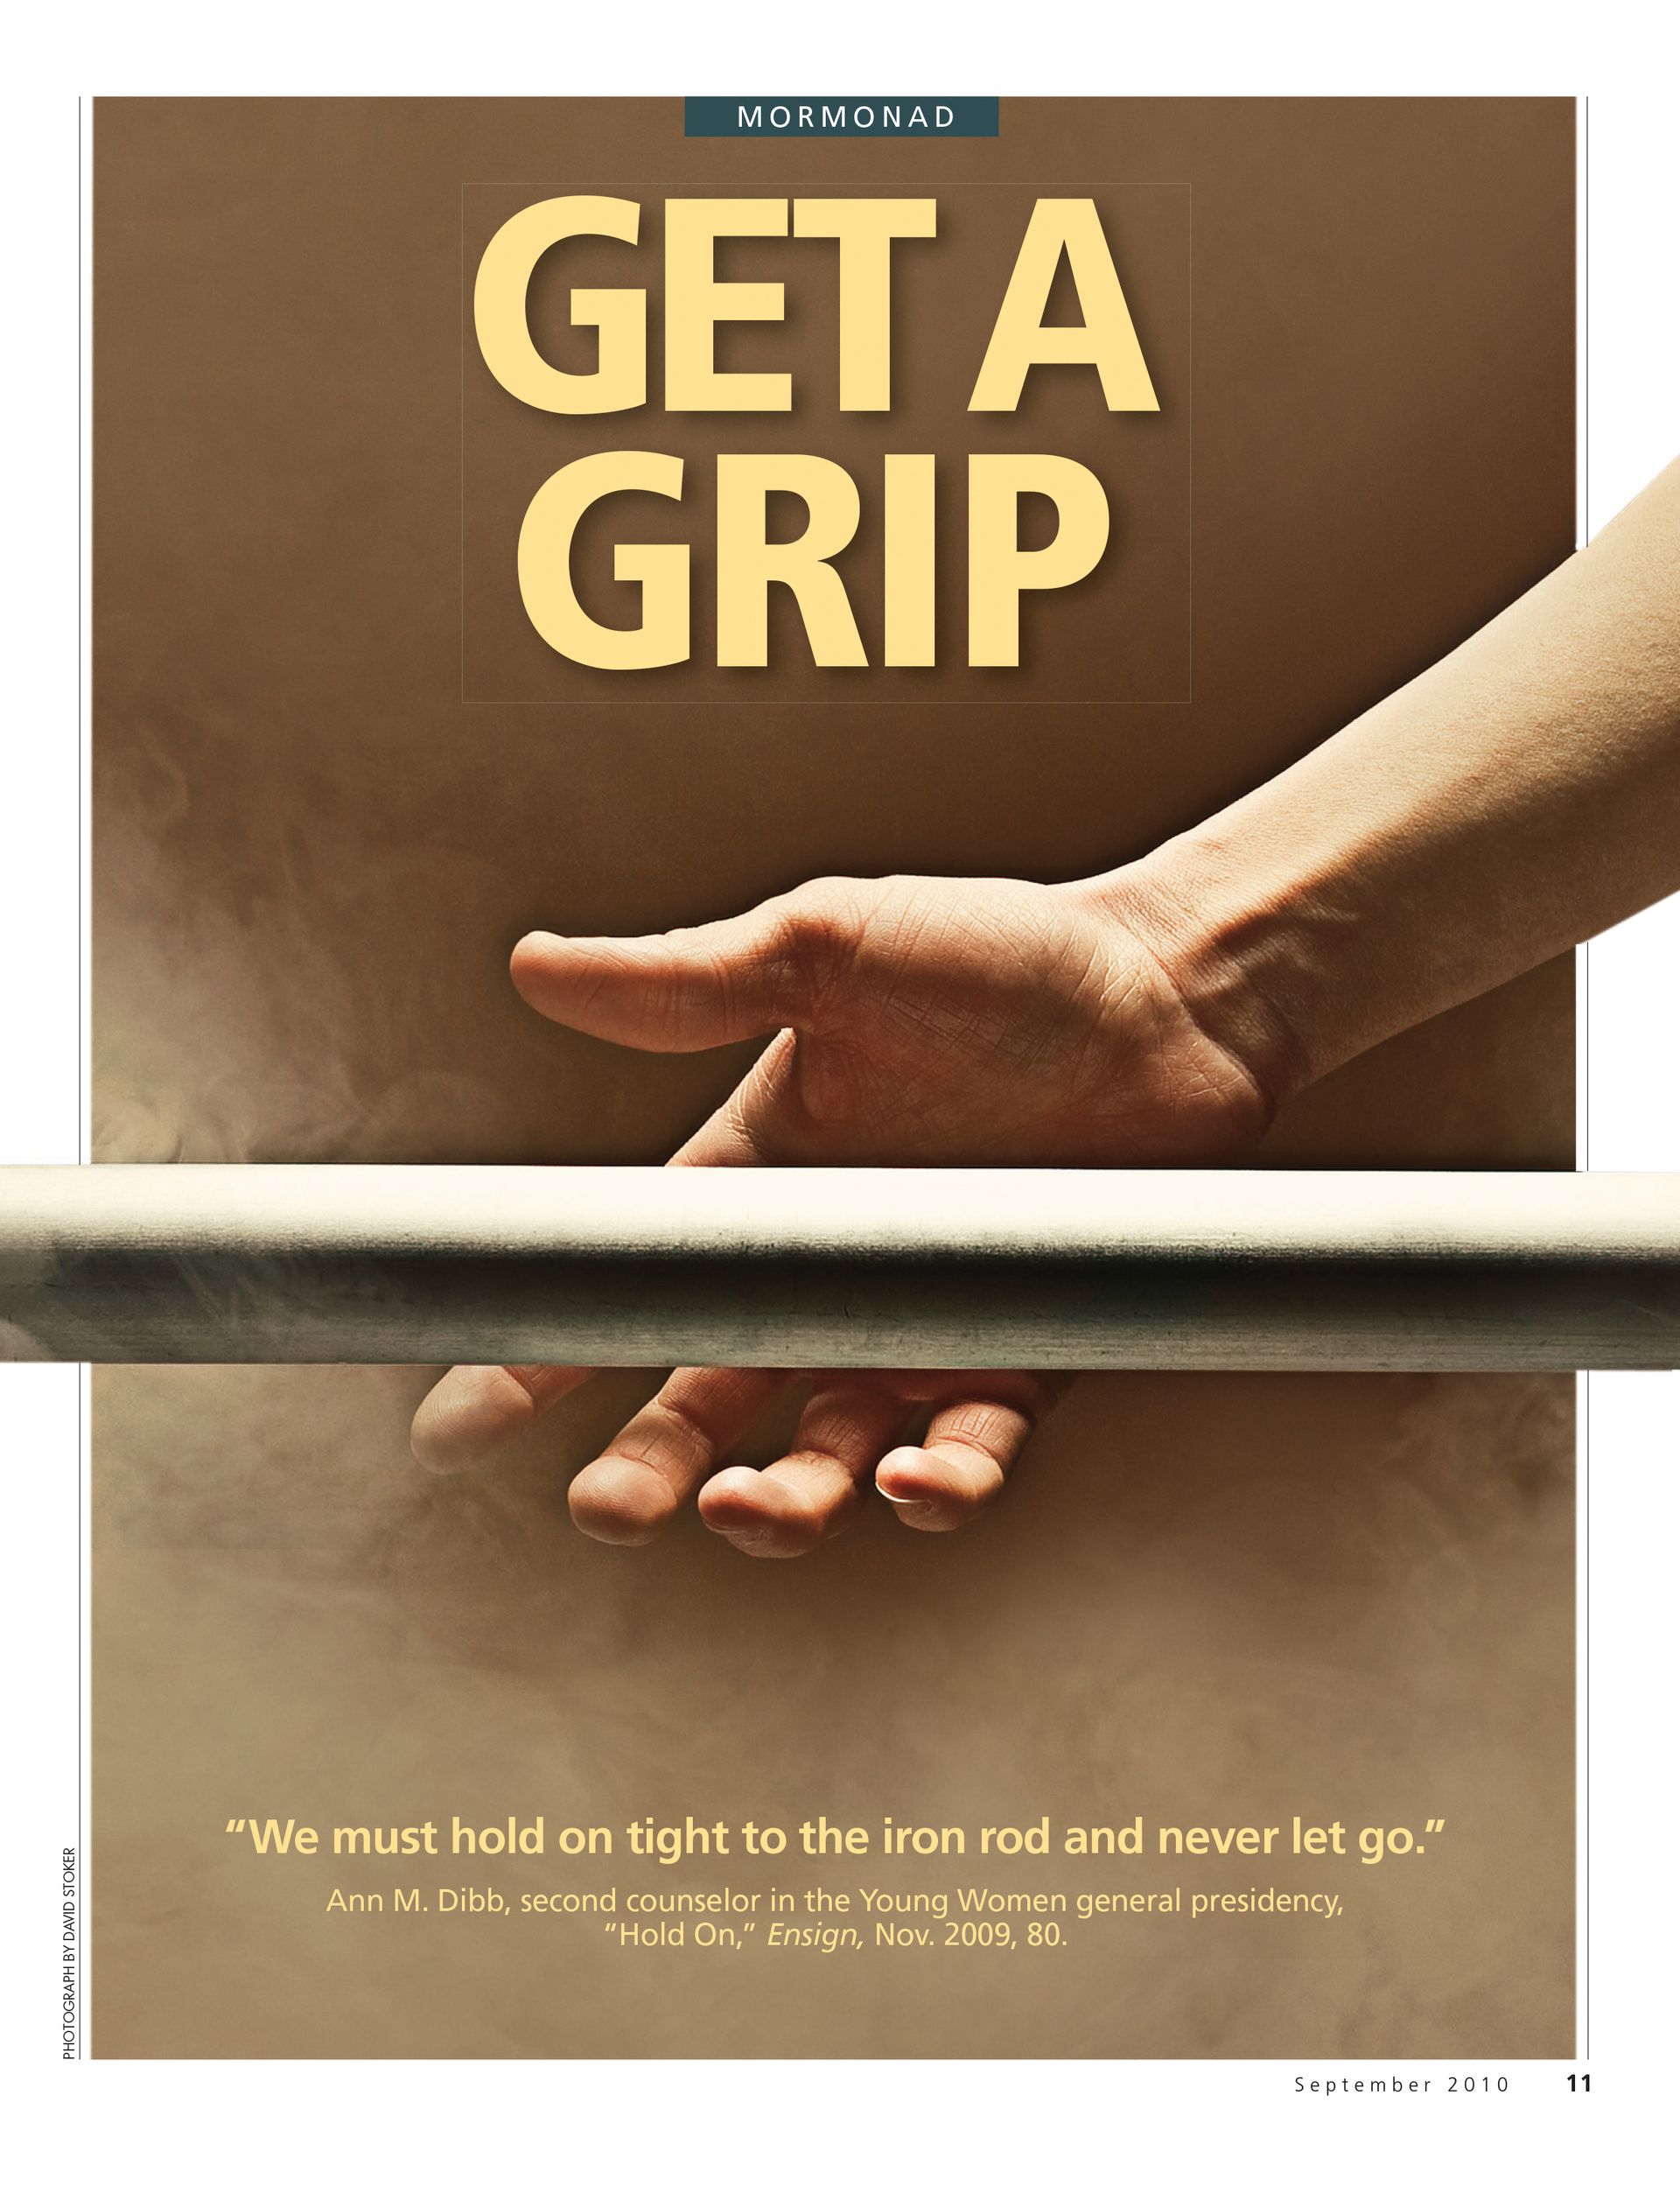 Get a Grip. “We must hold on tight to the iron rod and never let go.” Ann M. Dibb, second counselor in the Young Women general presidency, “Hold On,” Ensign, Nov. 2009, 80. Sept. 2010 © undefined ipCode 1.